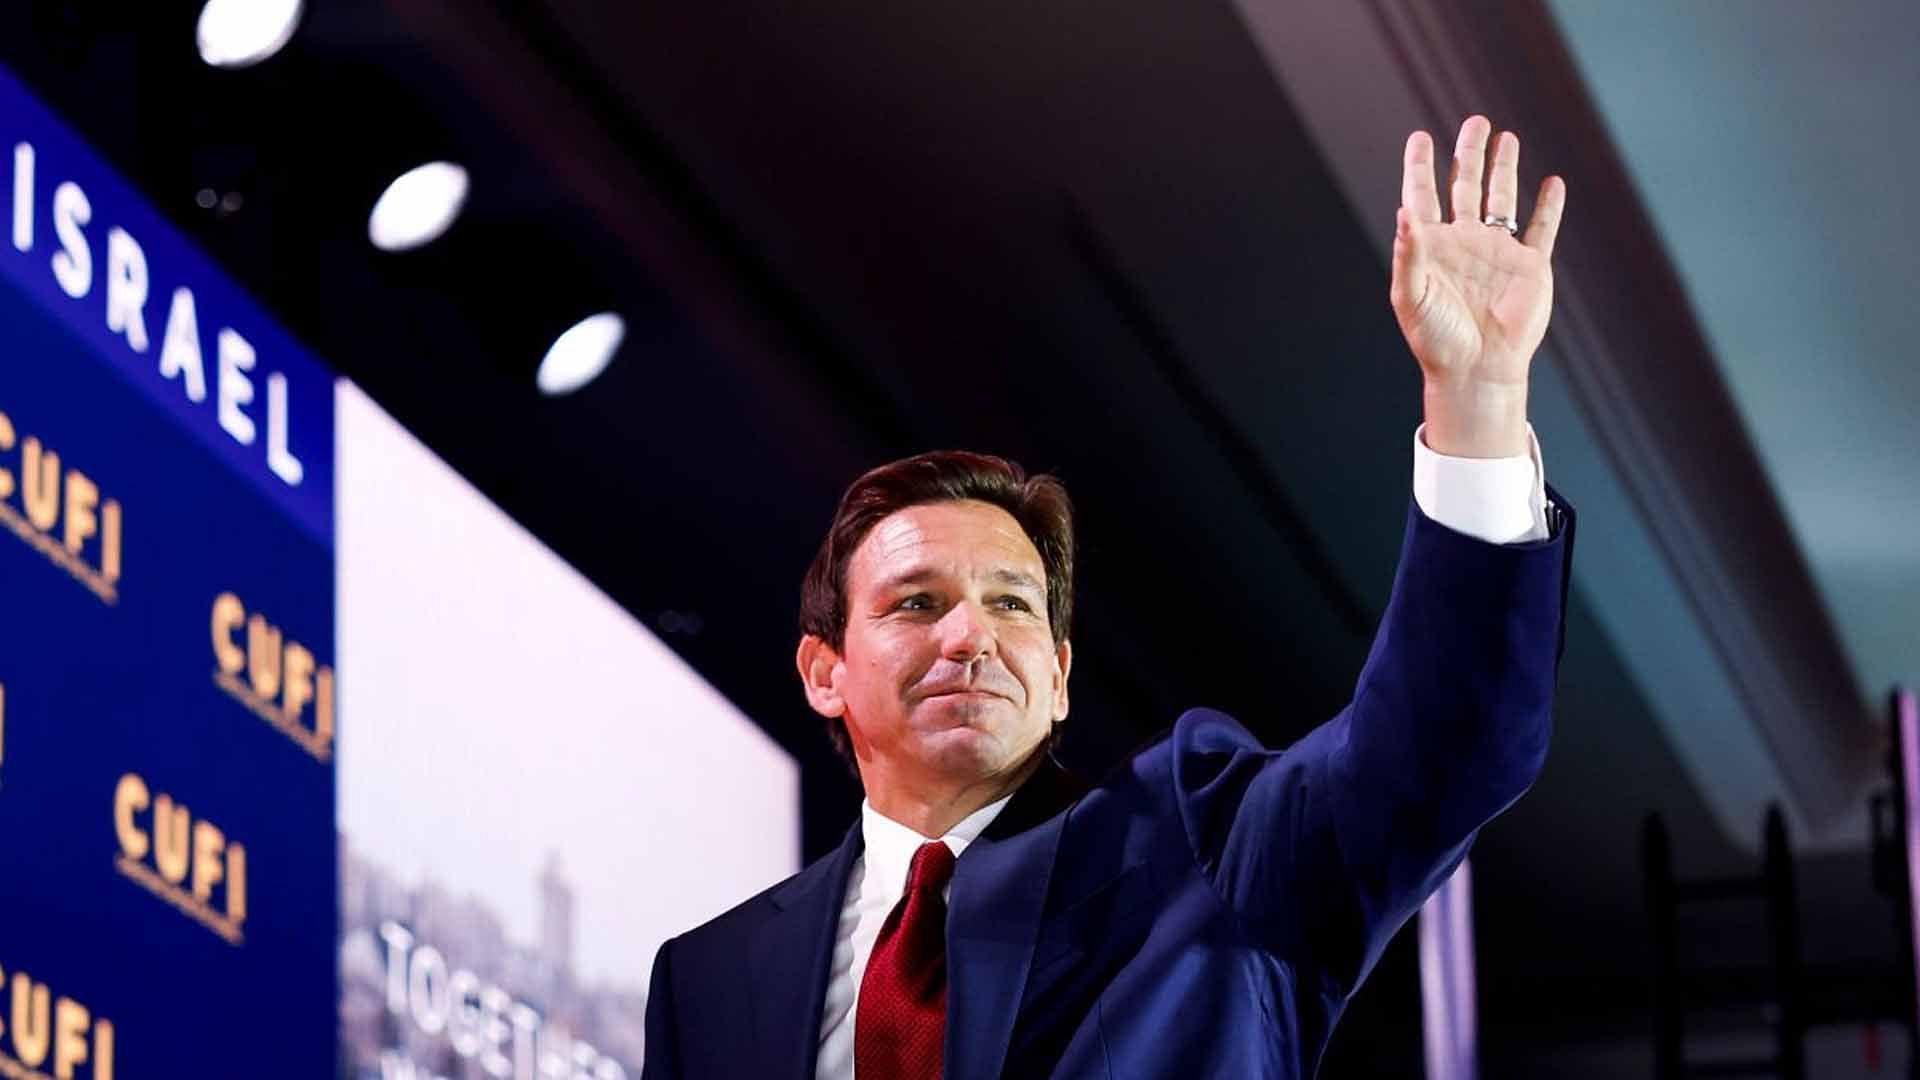 Ron DeSantis slammed for neo-nazi tweets by campaign staff (Image via Getty Images)